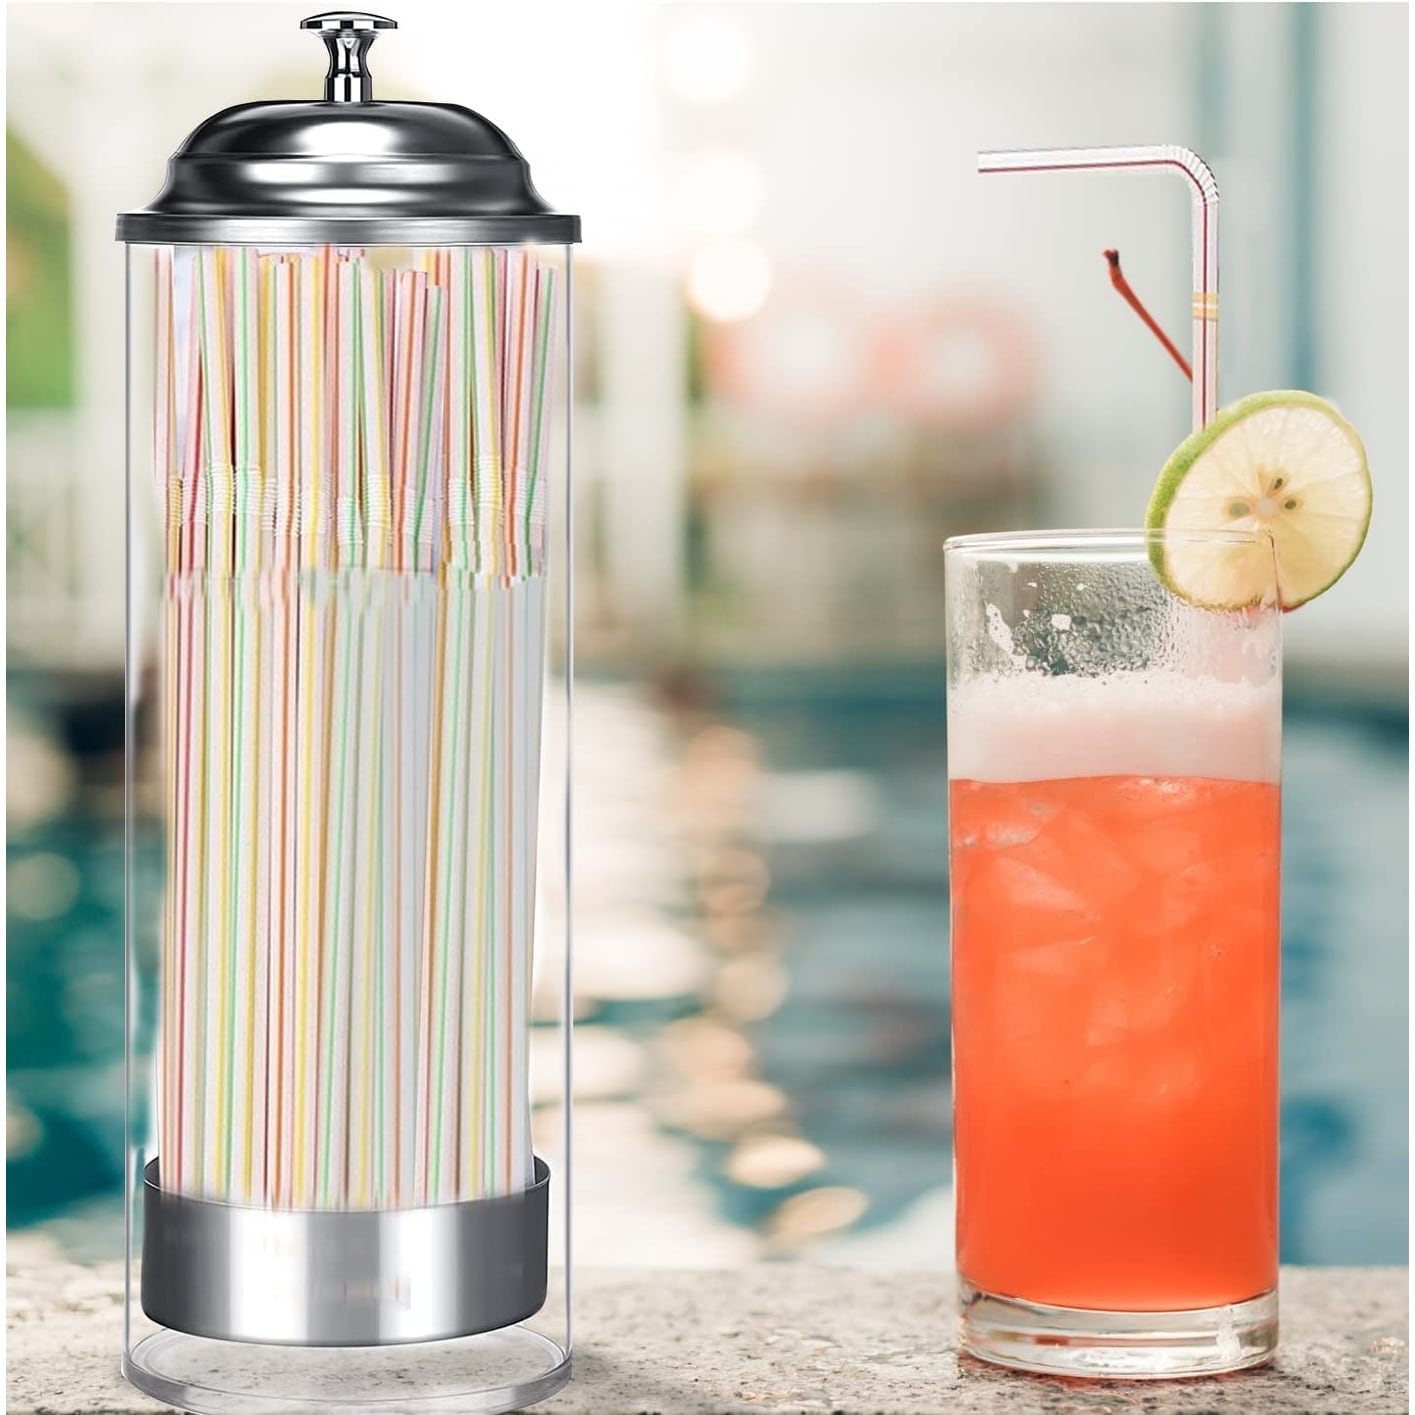 https://ak1.ostkcdn.com/images/products/is/images/direct/59f19a42fa648061de7ada50bbeff3ce3fec0cbd/Straw-Dispenser-with-Stainless-Steel-Lid%2C-Clear-Acrylic-Straw-Holder%2C-100-Striped-Plastic-Straws.jpg